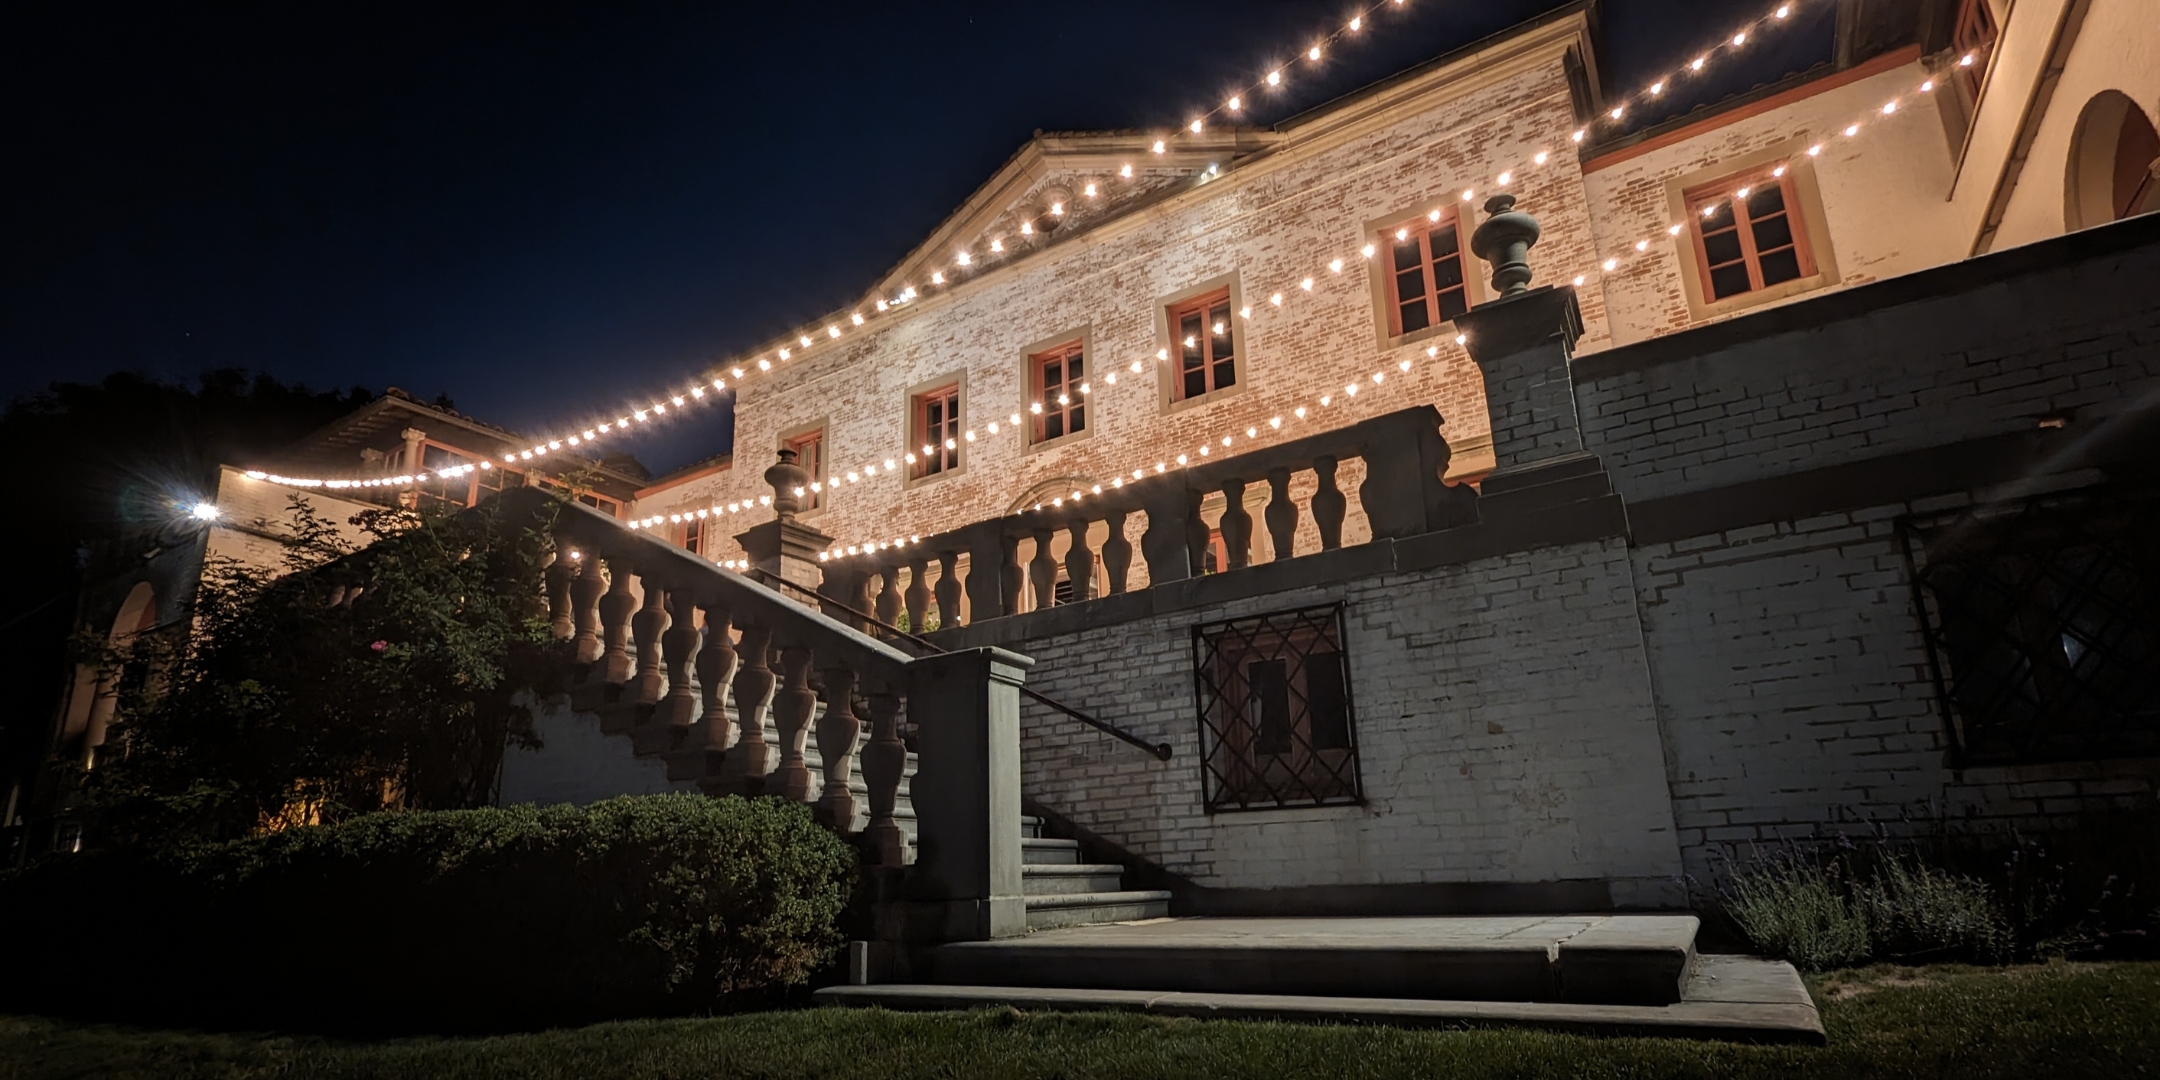 Villa Terrace at night. Photo courtesy of the Charles Allis and Villa Terrace Art Museums Inc..